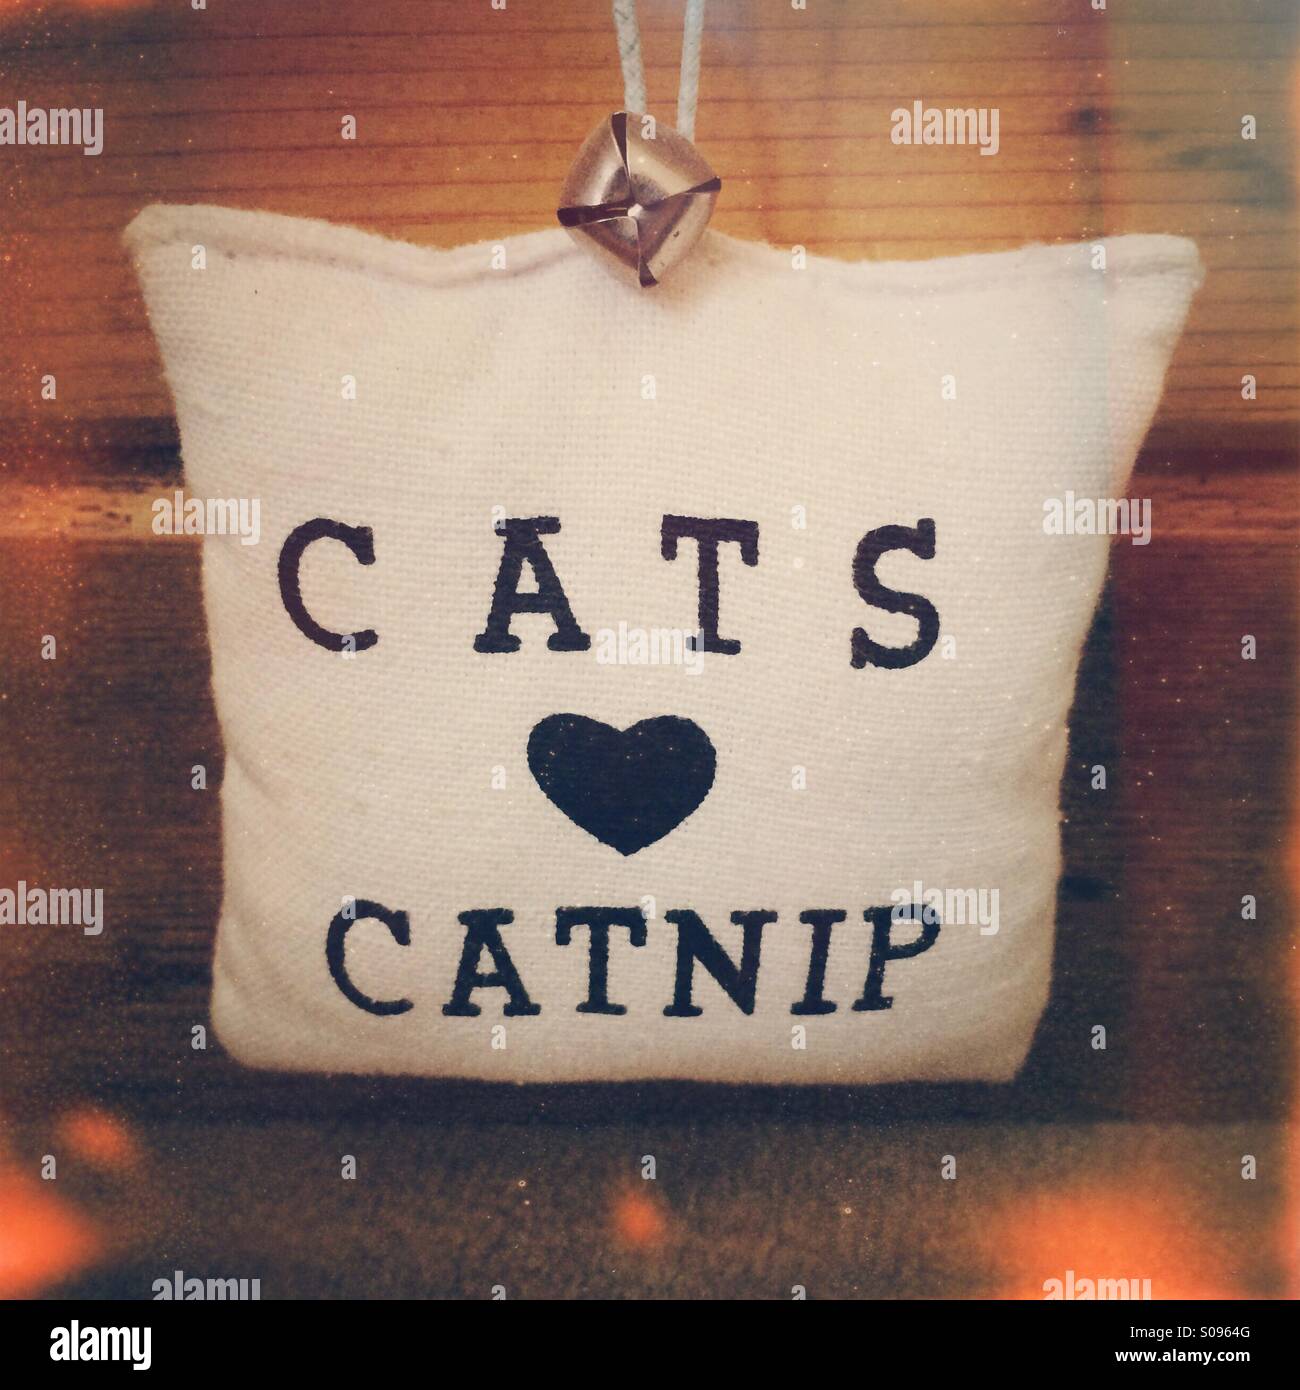 Cats love catnip bag, toy for cats Stock Photo